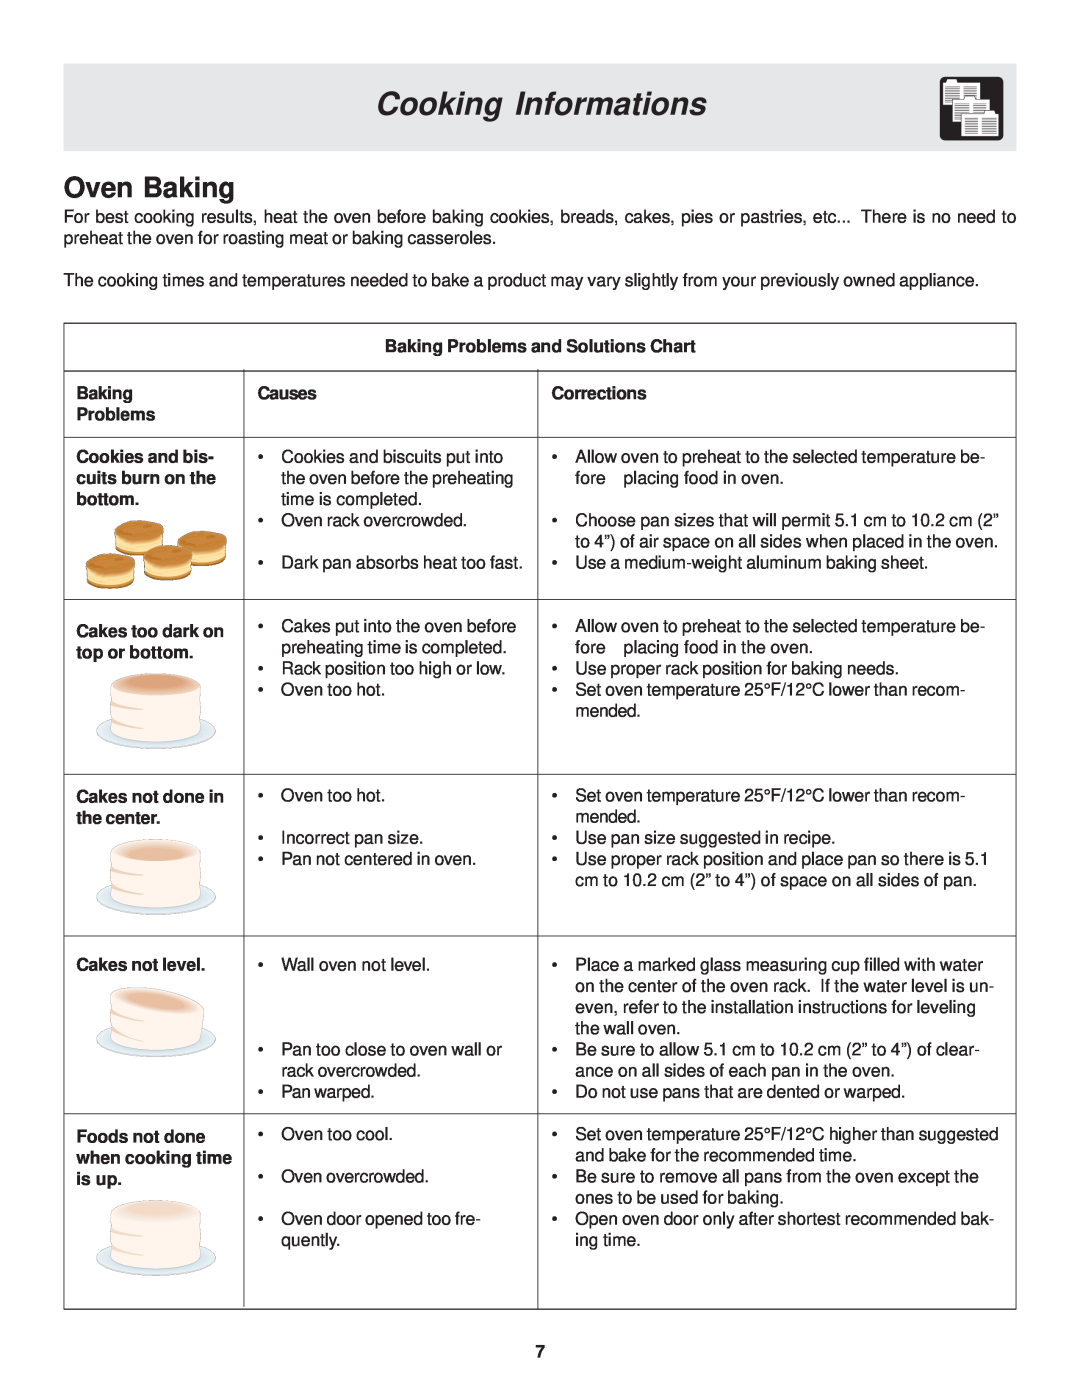 Frigidaire 318200929 Cooking Informations, Oven Baking, Baking Problems and Solutions Chart, Causes, Corrections, bottom 